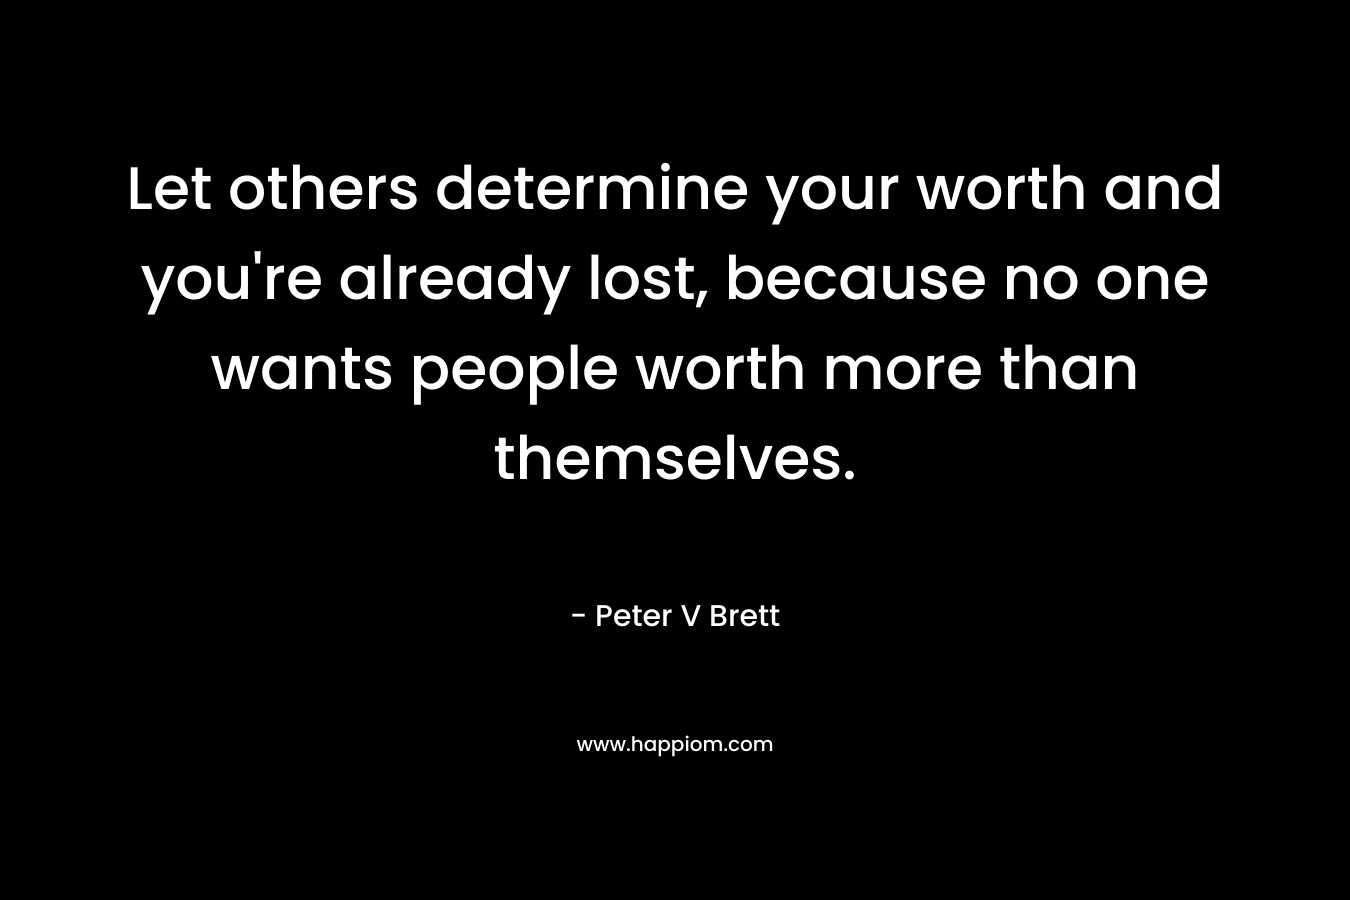 Let others determine your worth and you’re already lost, because no one wants people worth more than themselves. – Peter V Brett